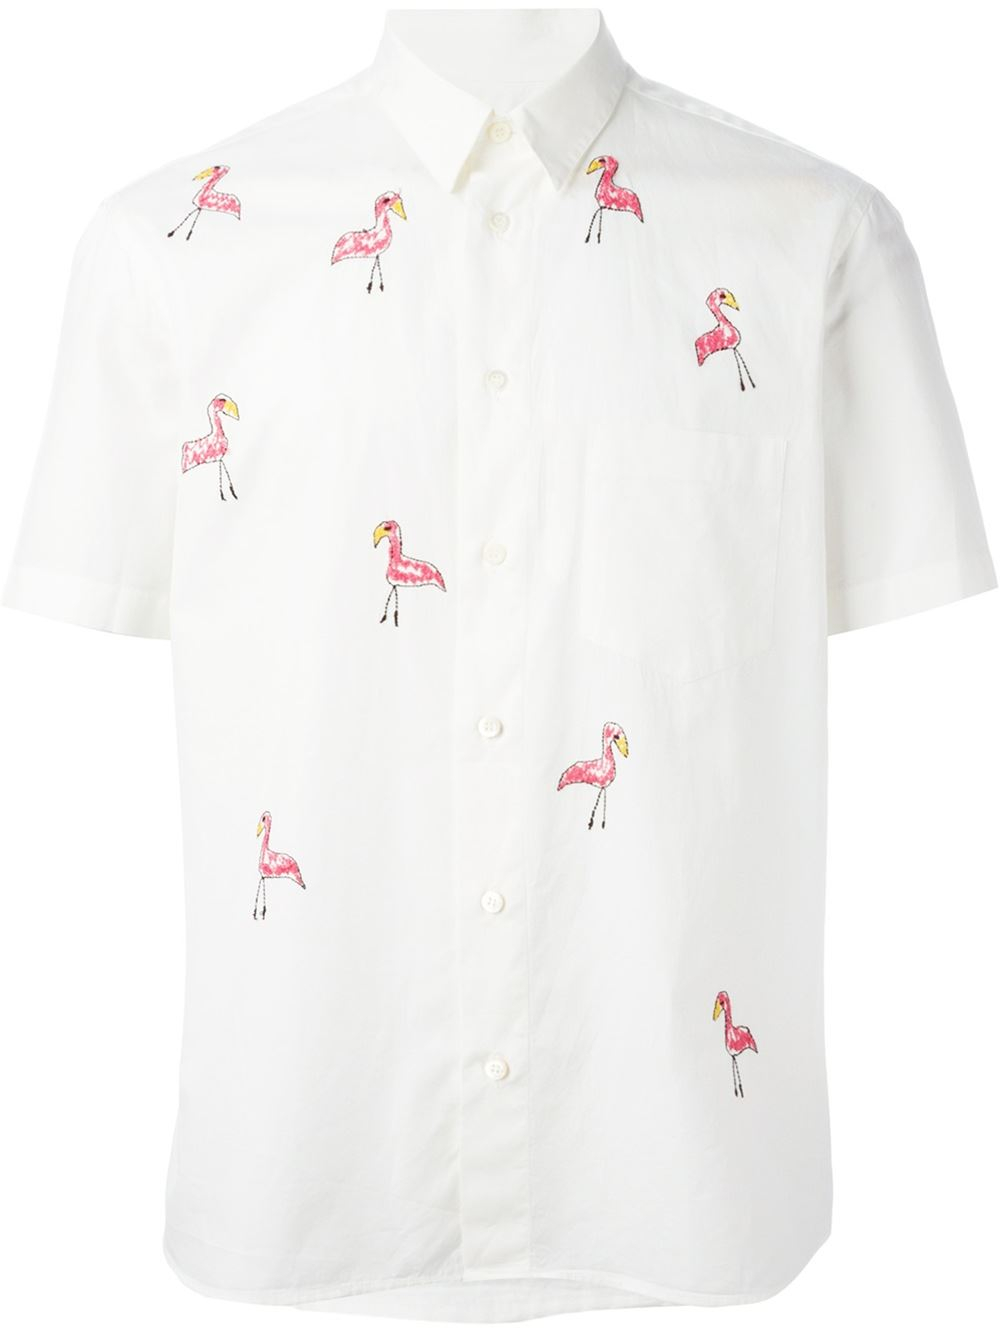 Lyst - Jimi Roos Flamingo Embroidery Shirt in White for Men